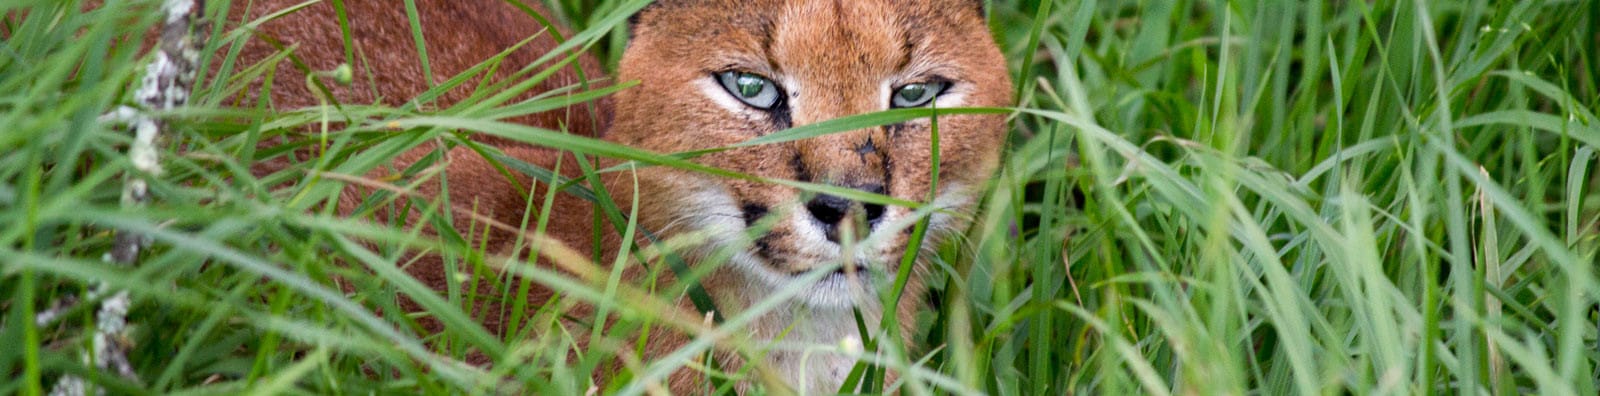 Contact Chalo Africa (caracal)